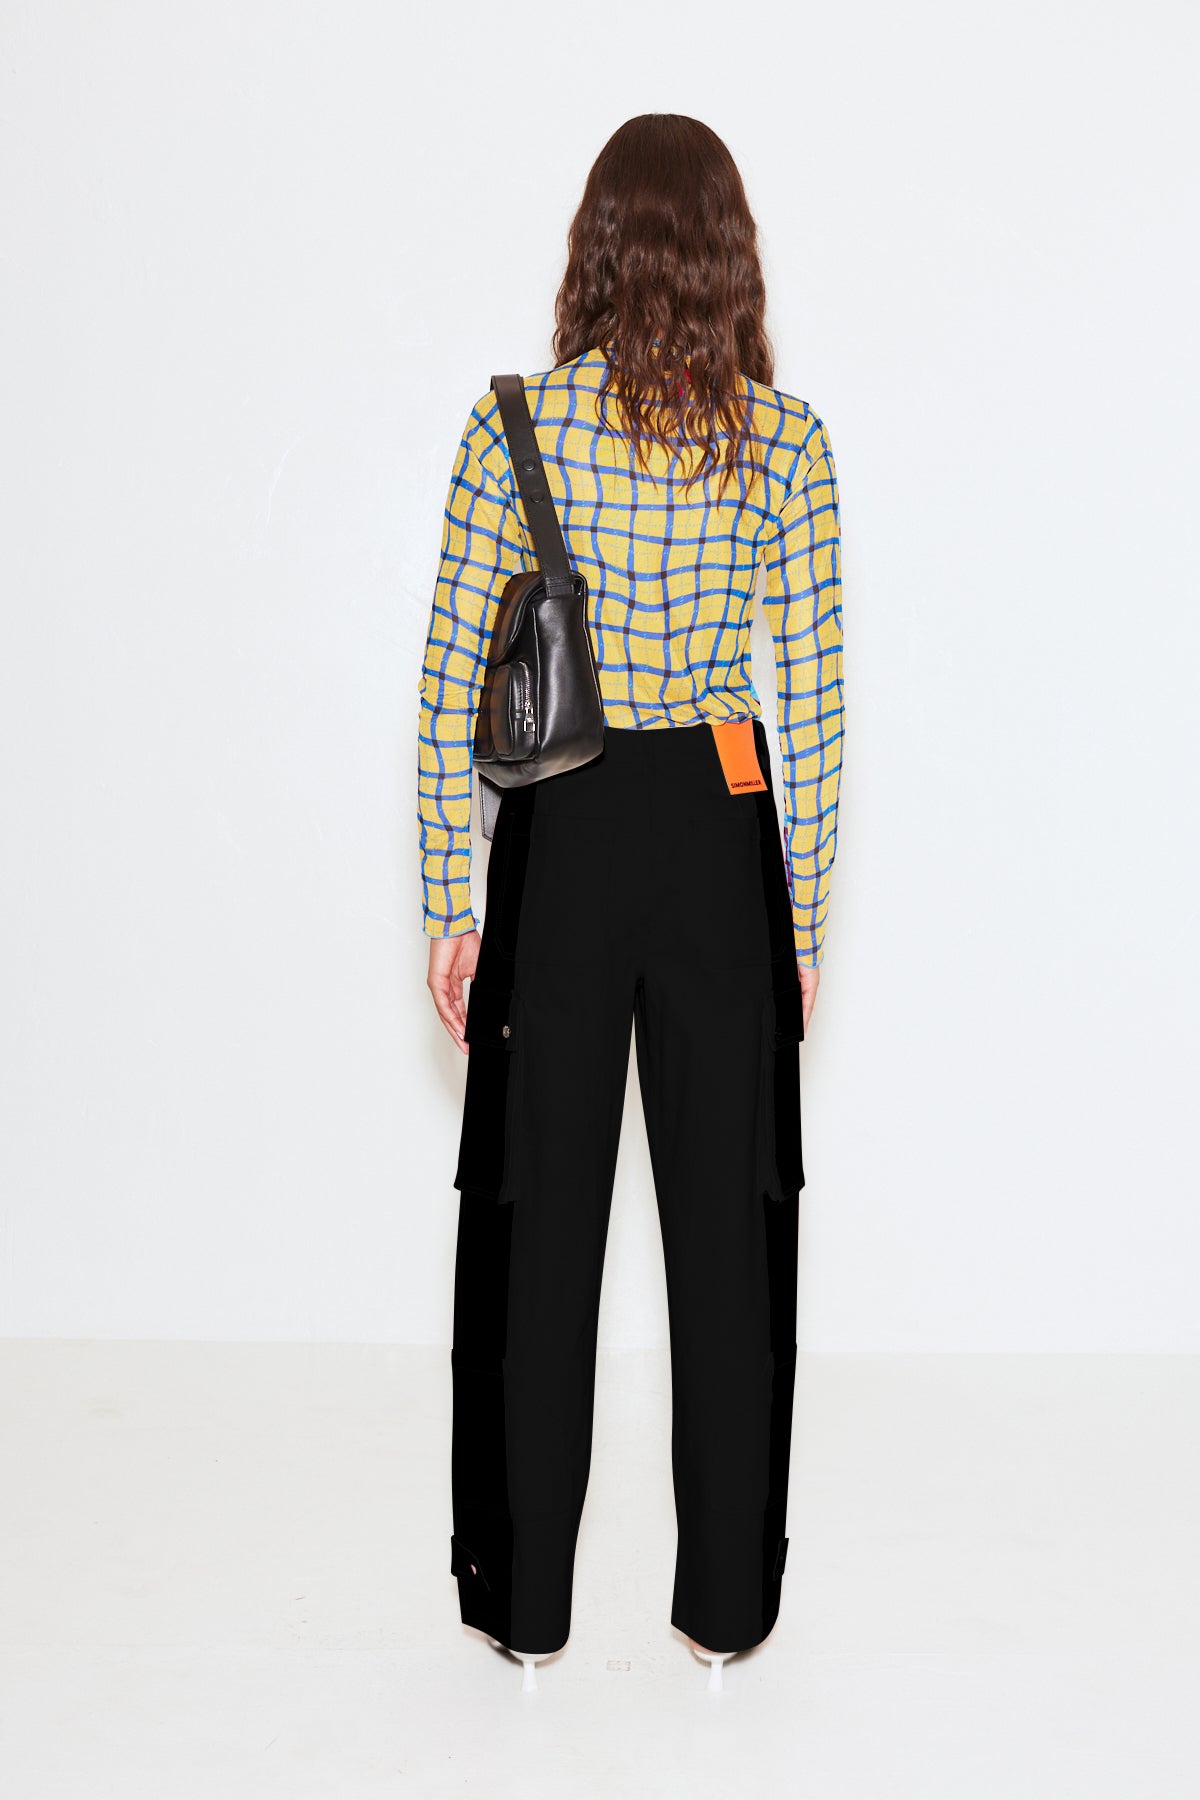 Combo Wendel Top in Blue Yellow Plaid